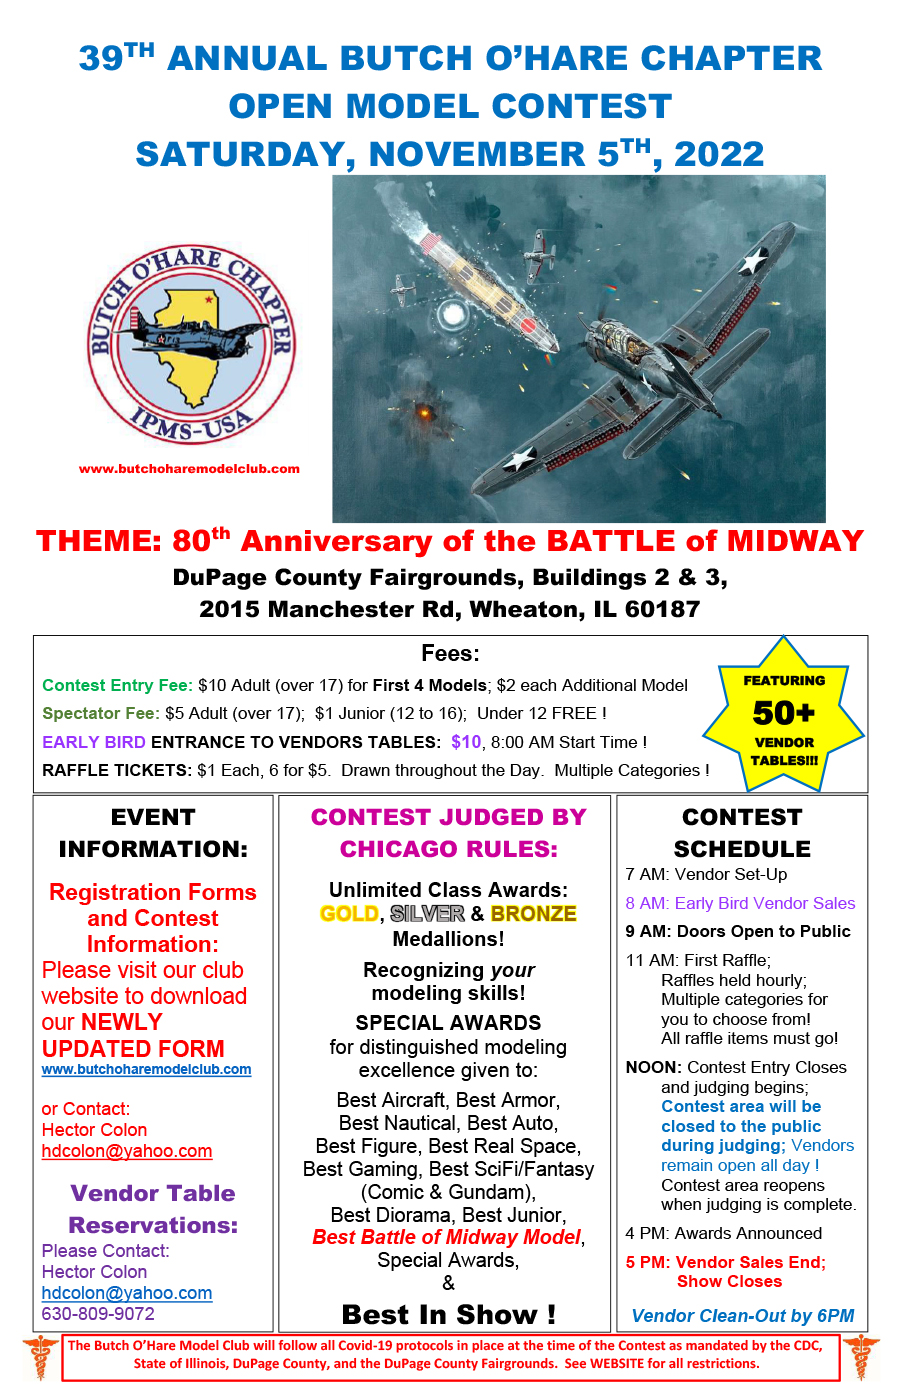 39th Annual Butch O’Hare Chapter Open Model Contest DuPage Event